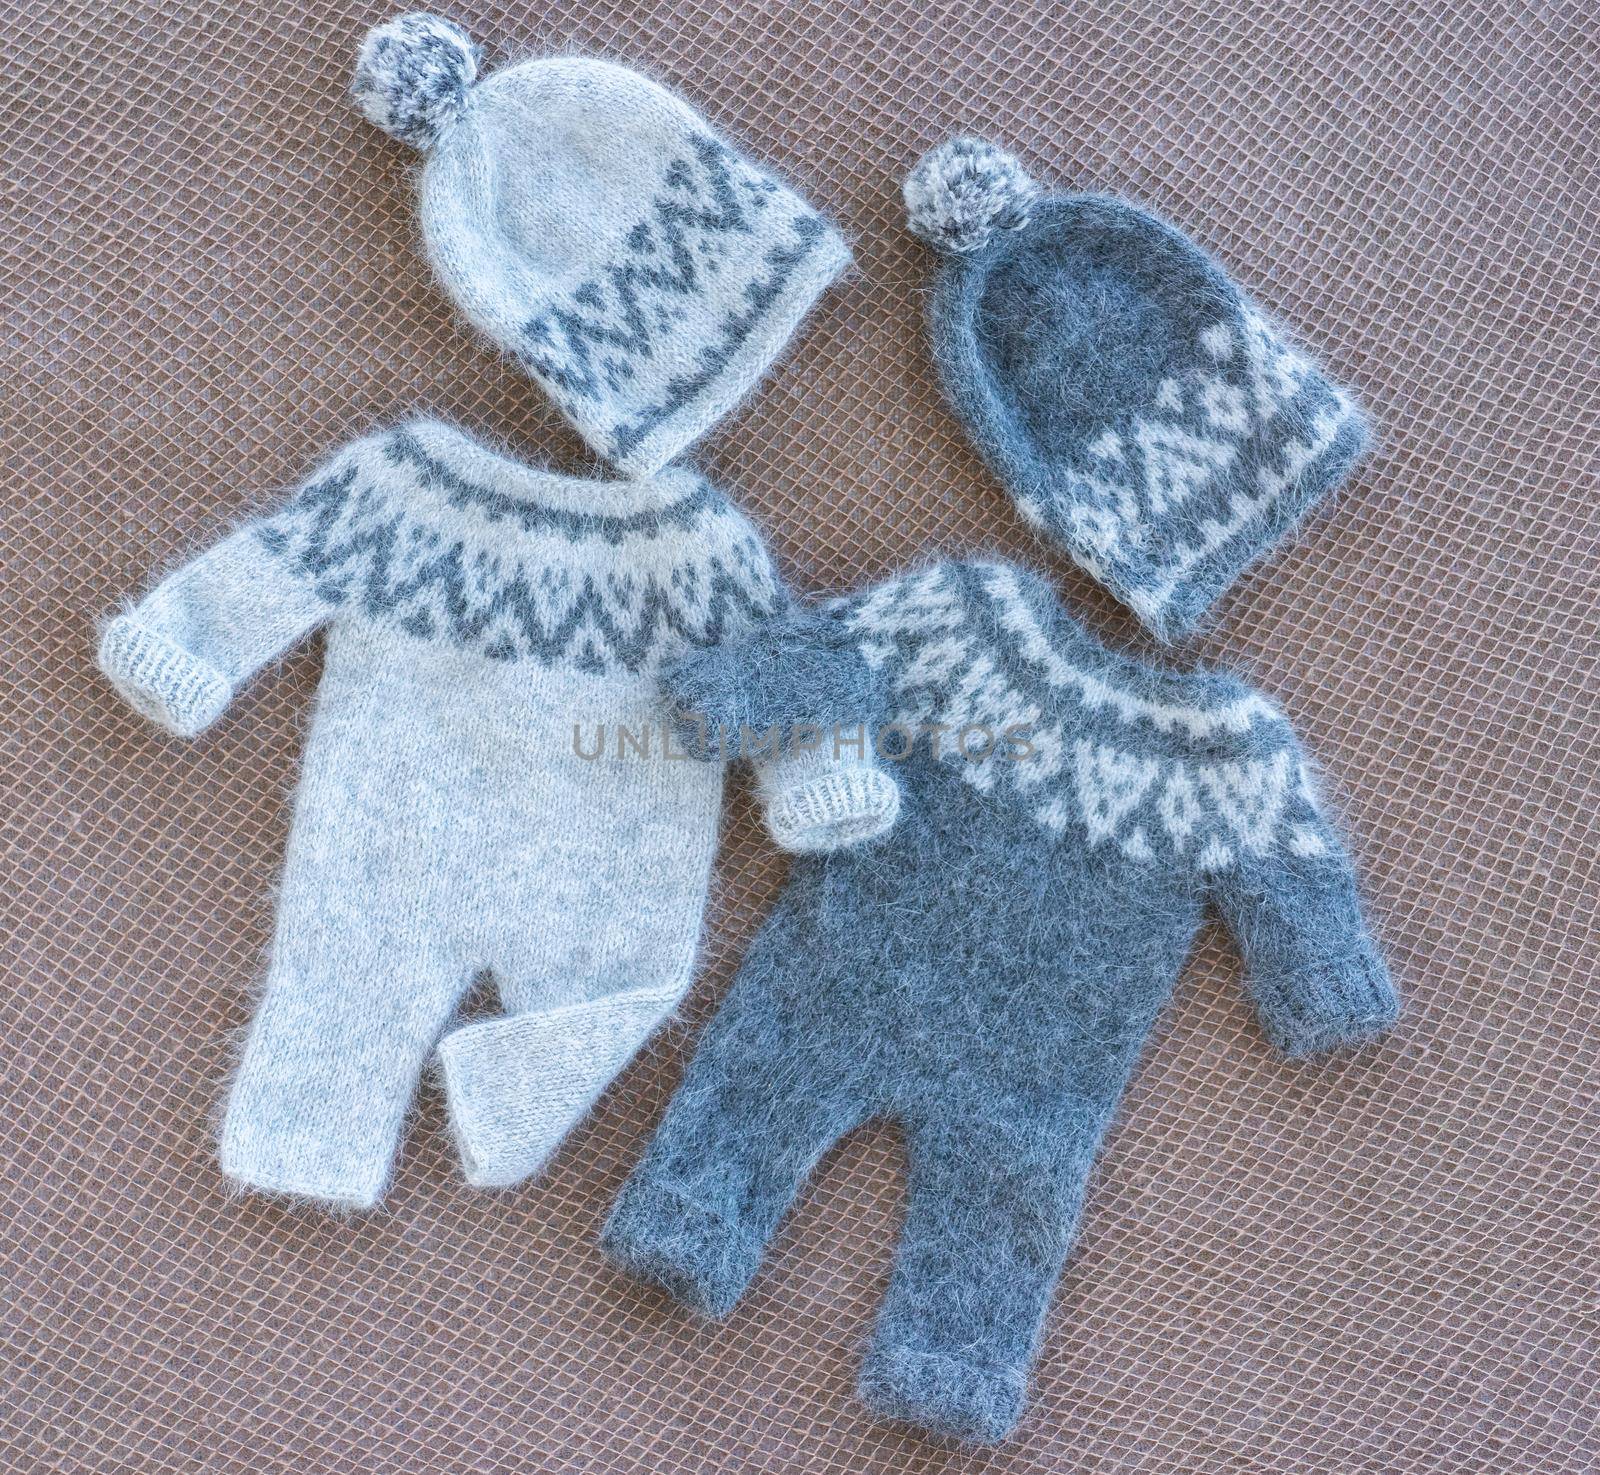 knitted newborn baby clothes composed on a fabric